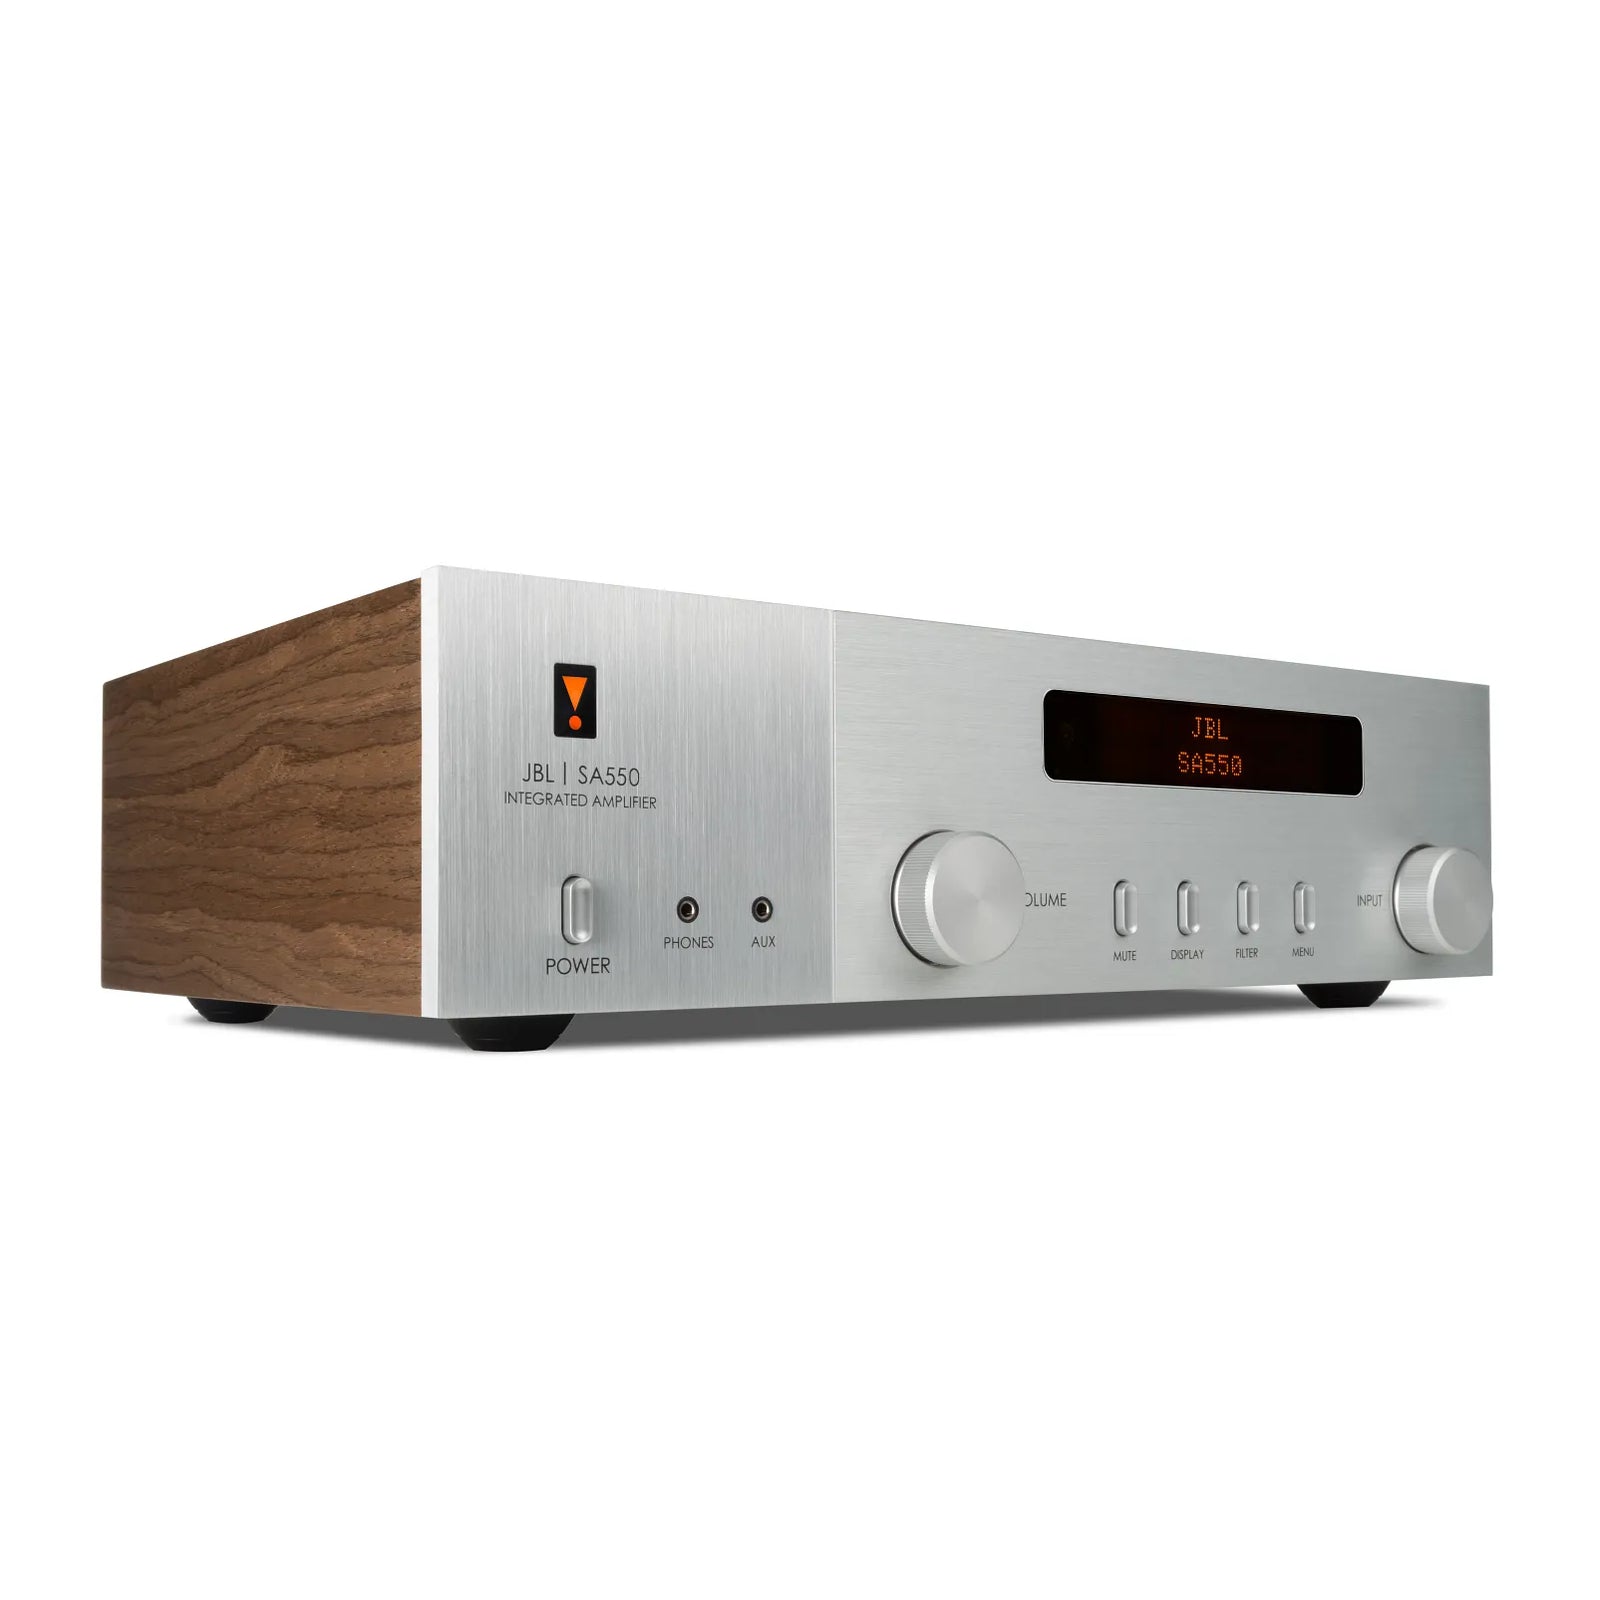 SA550 Classic SA550 Classic Integrated Amplifier with Bluetooth The JBL SA550 Classic is inspired by the classic JBL SA600 amplifier from the 1960’s, with retro styling and walnut veneer side panels to match JBL Classic and Studio Monitor loudspeakers on the outside. On the inside, the JBL SA550 is a music system for today using an advanced amplifier topology with high power output, inventive efficiency, and fine noise control for captivating musicality and effortless power.